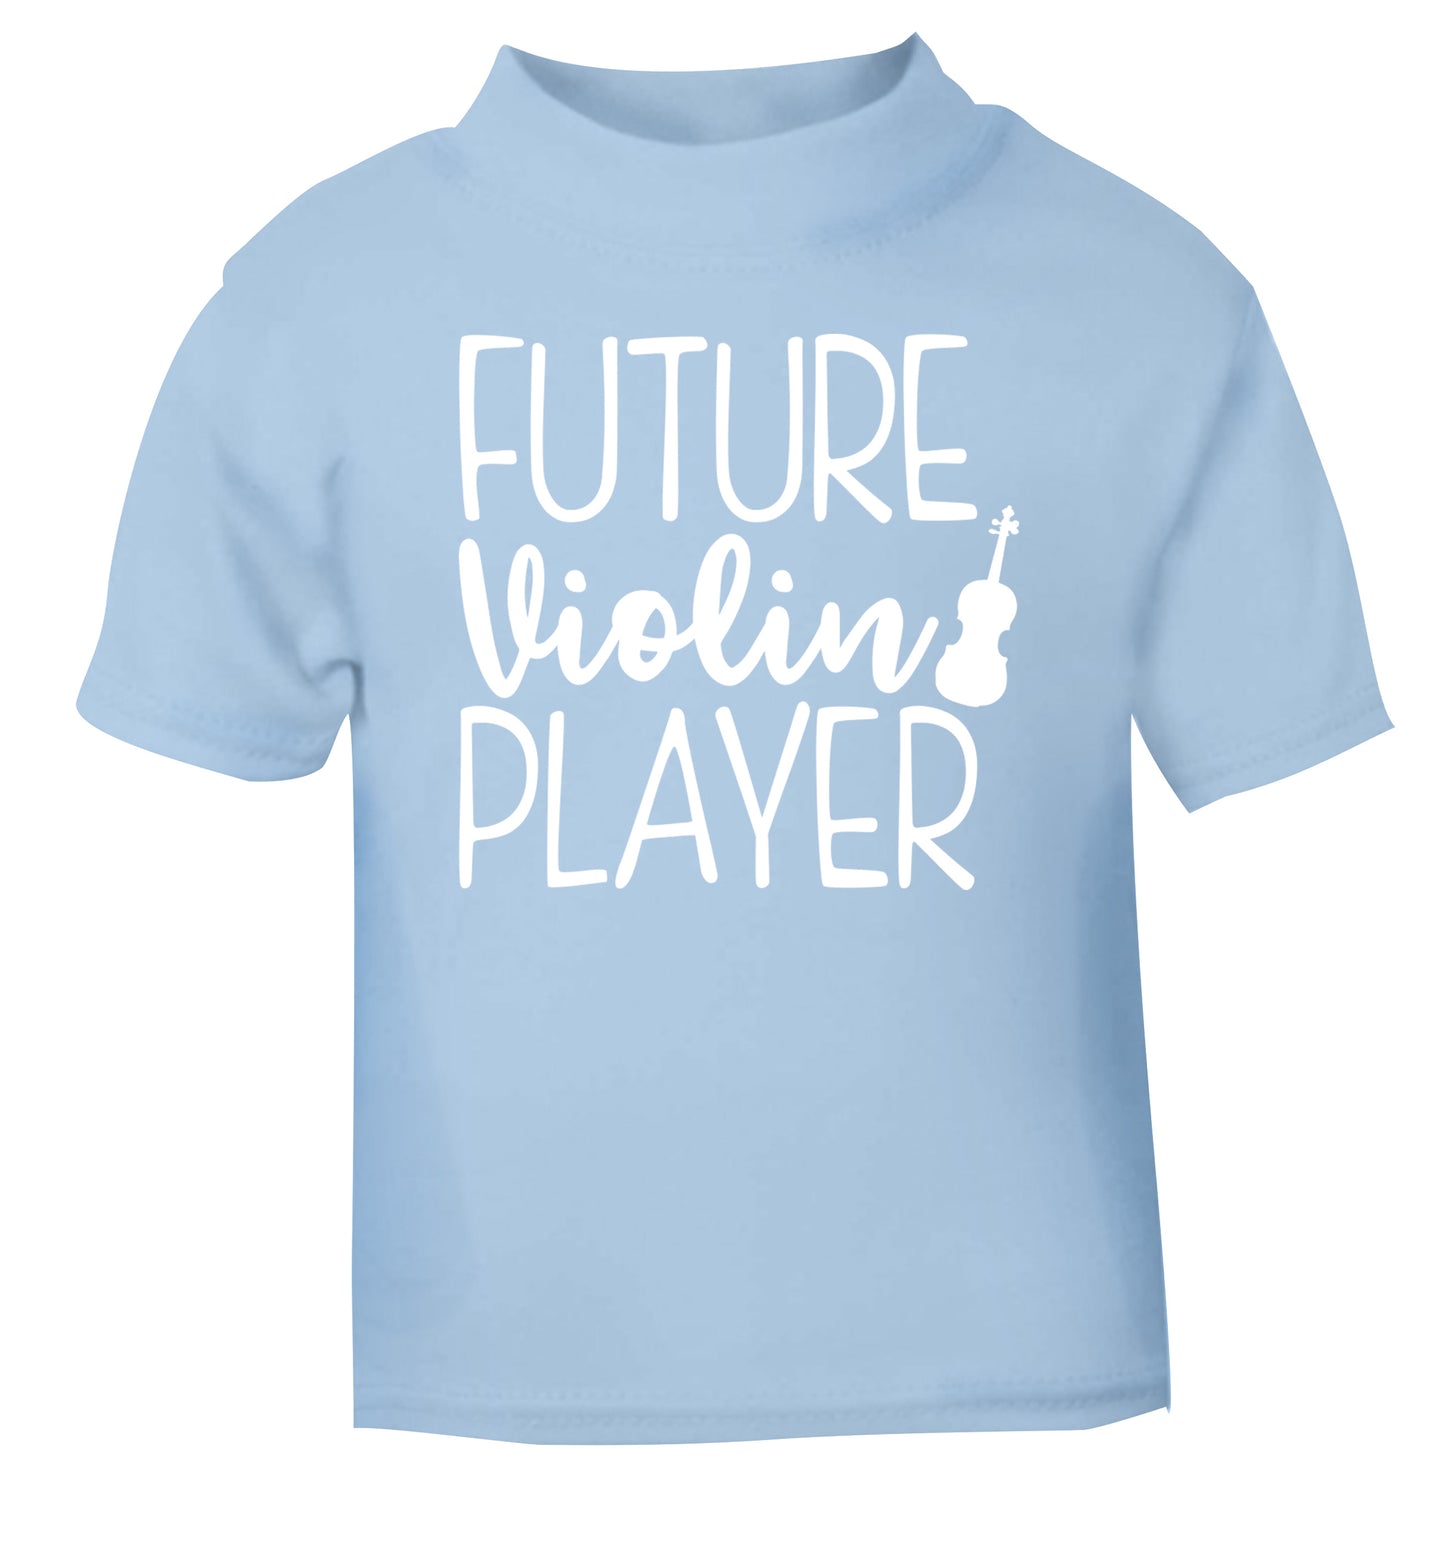 Future Violin Player light blue Baby Toddler Tshirt 2 Years